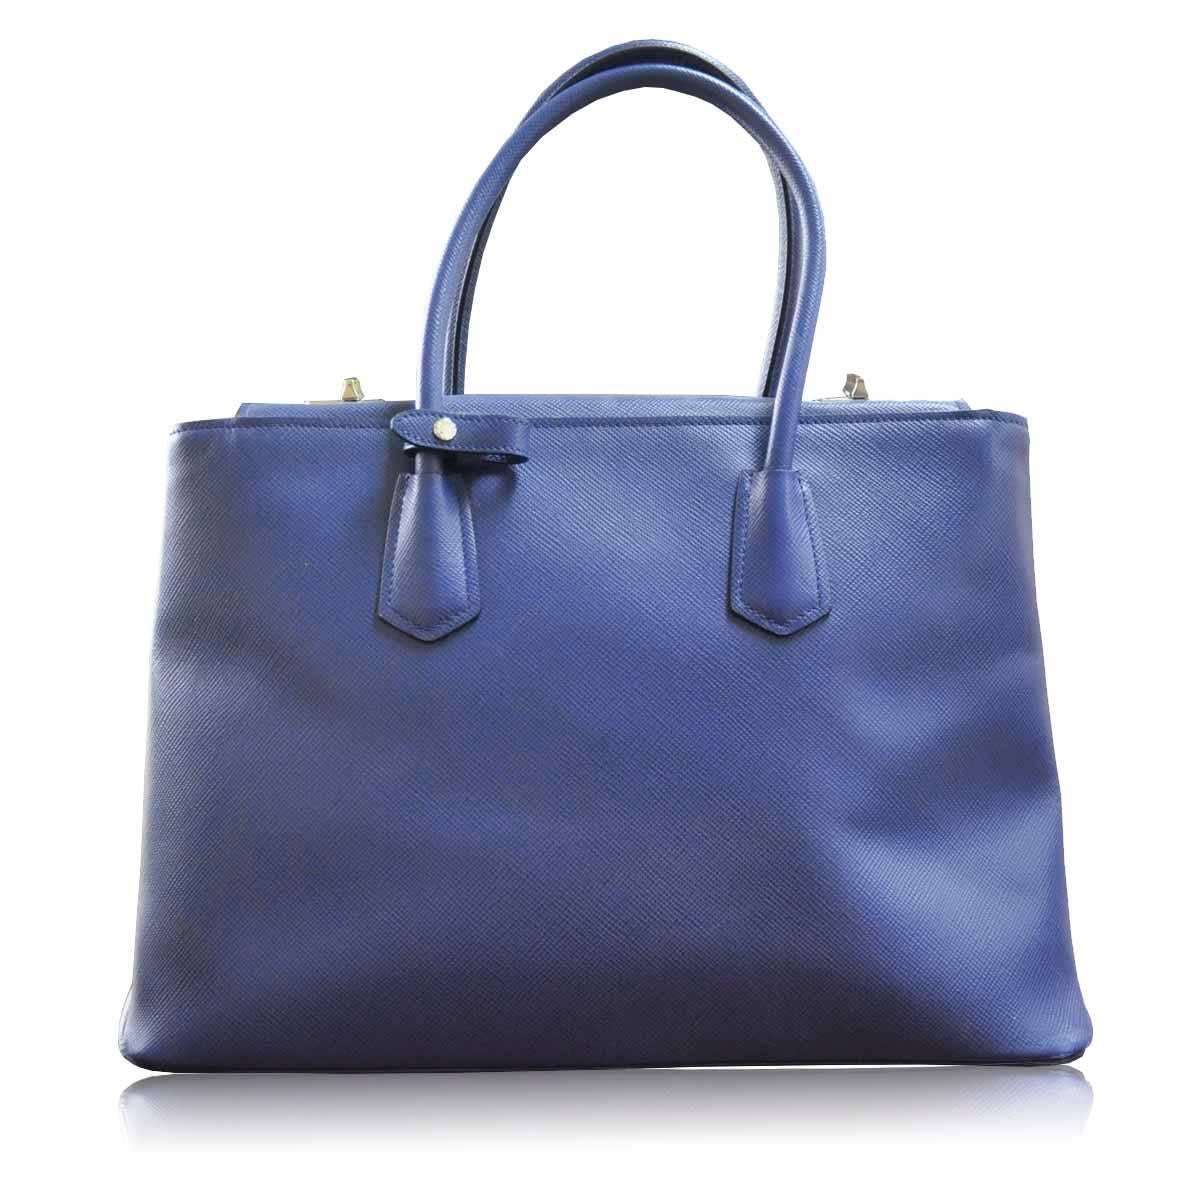 Company - PRADA
Model - Tote Twin Bag
Material - Blue Leather, Bluette
Measurements - 15″ x 10.25″ x 7″
Condition - Outside – Excellent condition.  Some small white marks on the bottom.  Very minor. 9/10
Inside – Excellent condition, no rips,